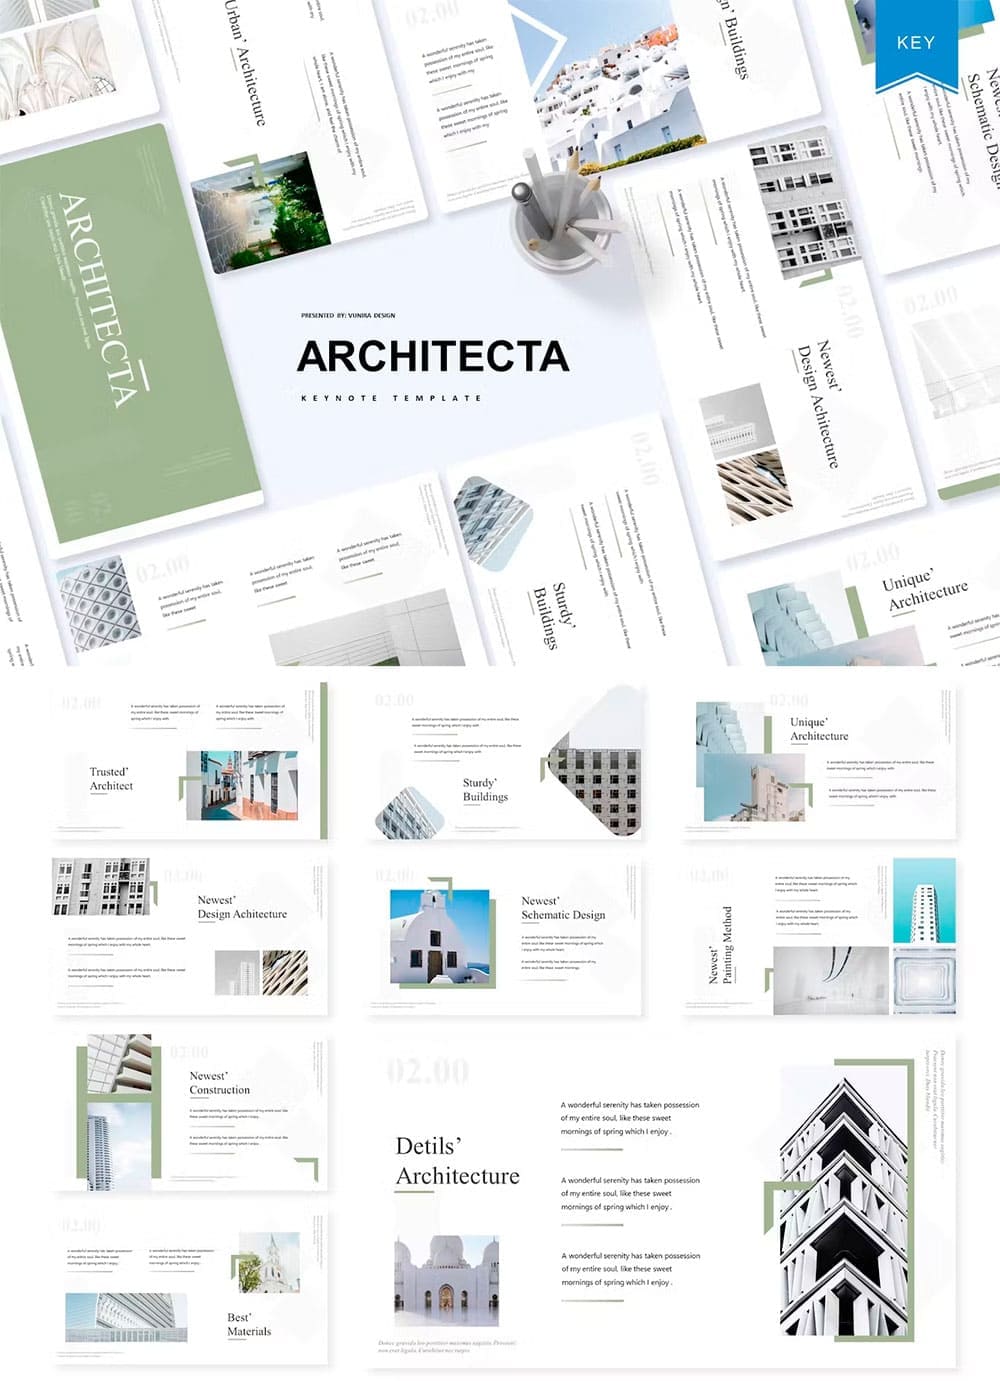 Architecta keynote template, picture for pinterest.